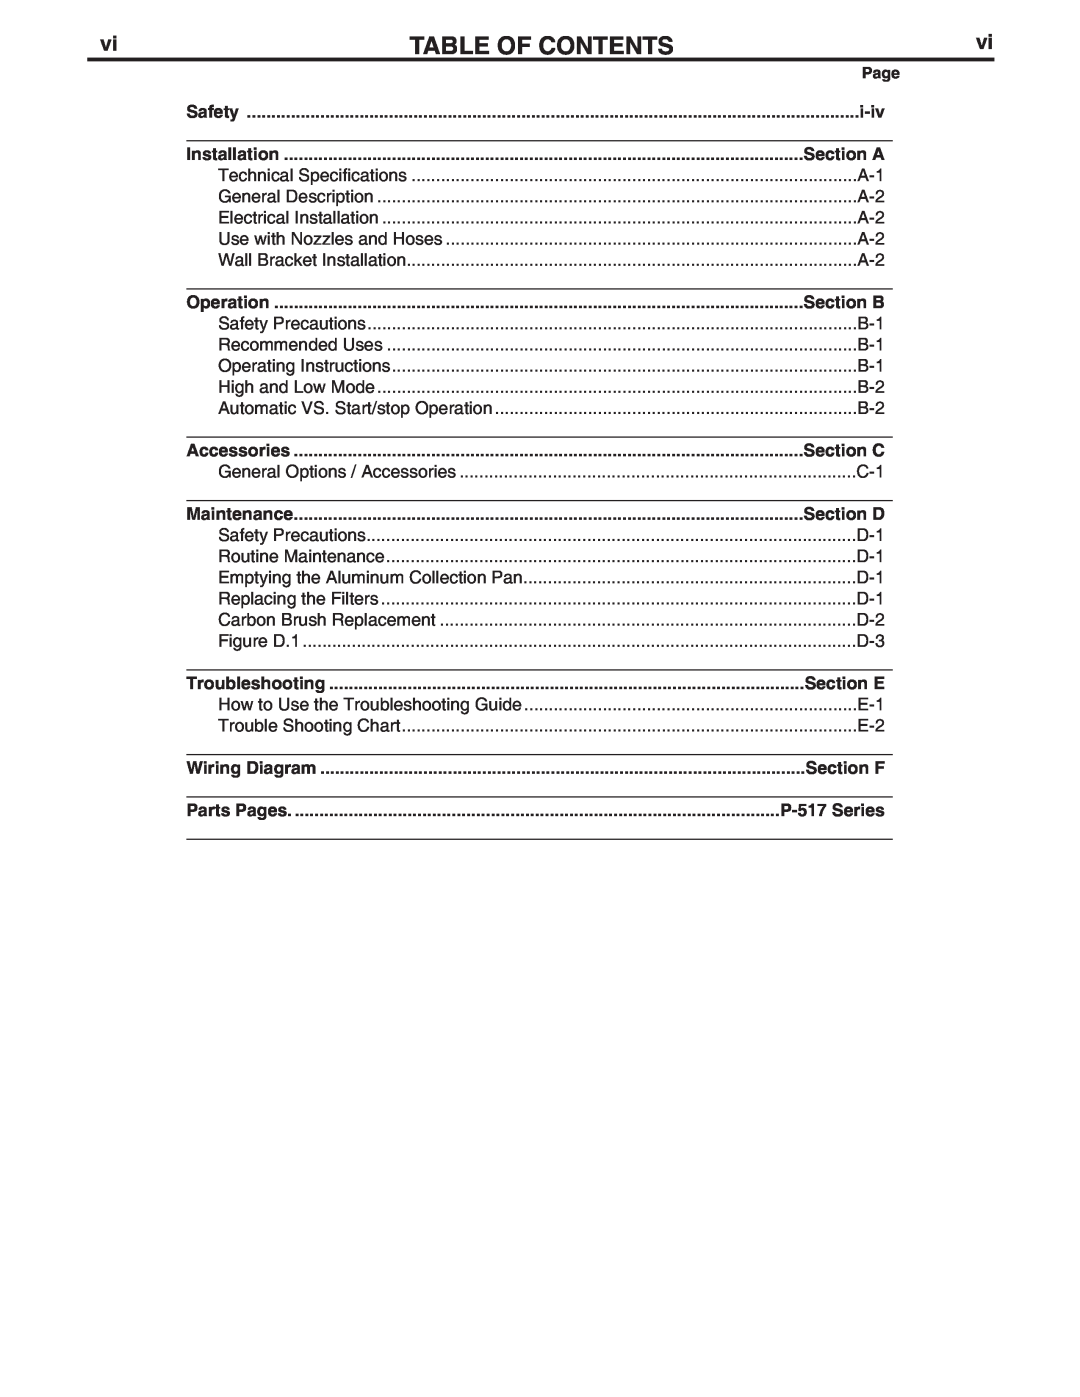 Lincoln Electric IM857 manual Table Of Contents 